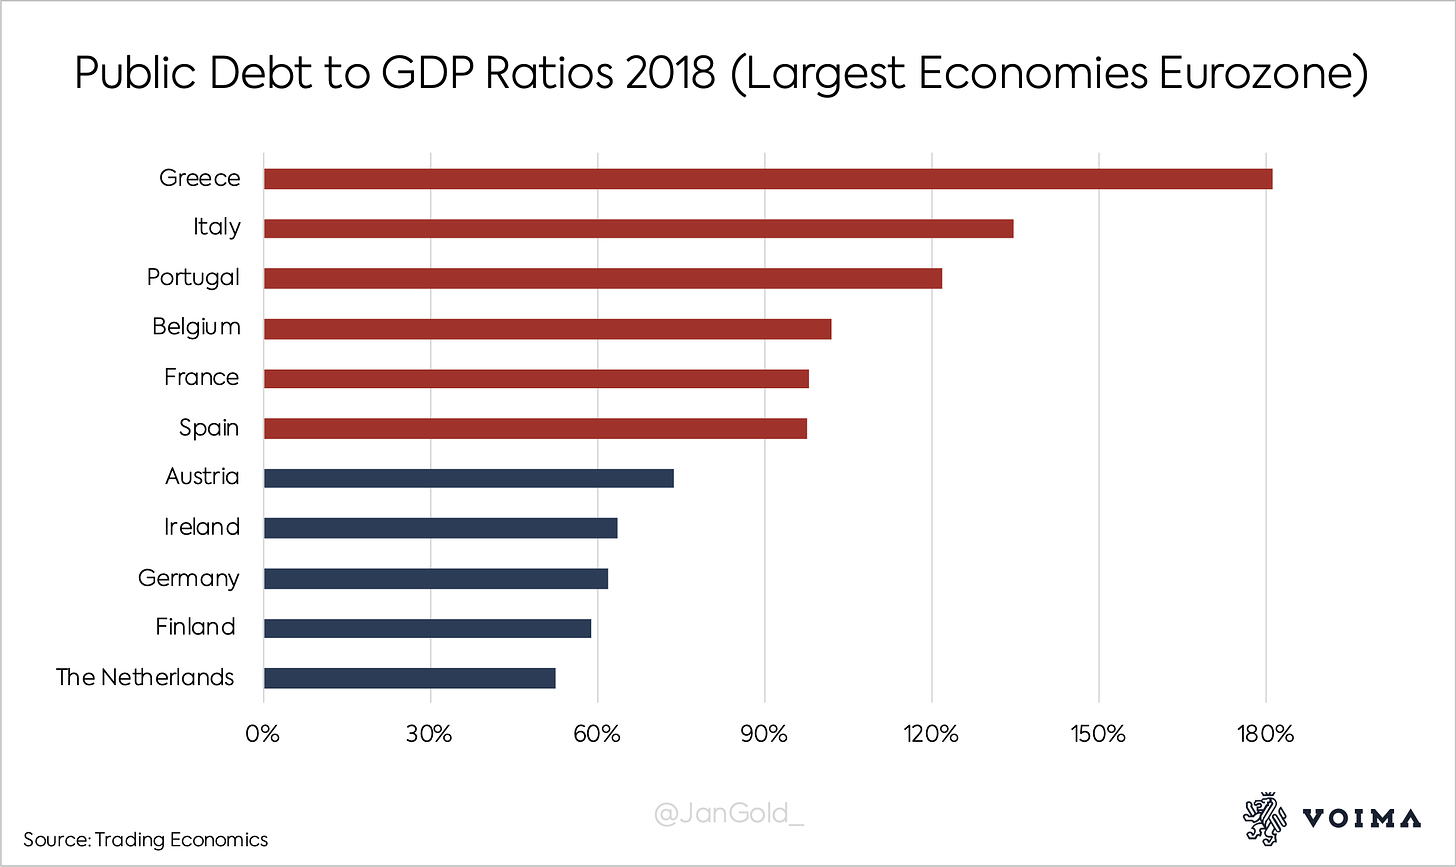 The Northern countries in the eurozone have the lowest public debt to GDP ratios. Southern countries tend to have higher debt ratios. 